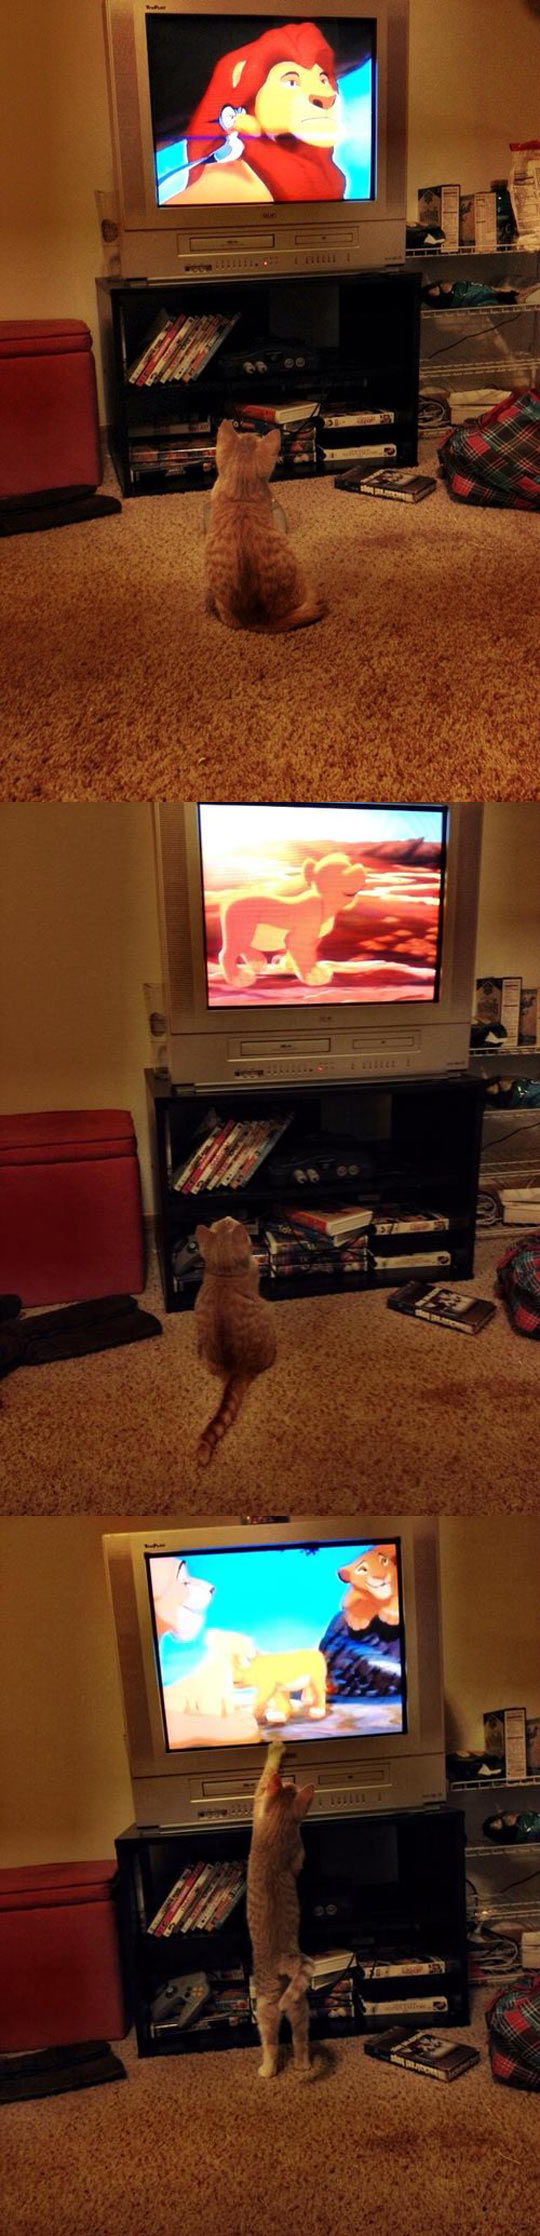 Everyone loves The Lion King…